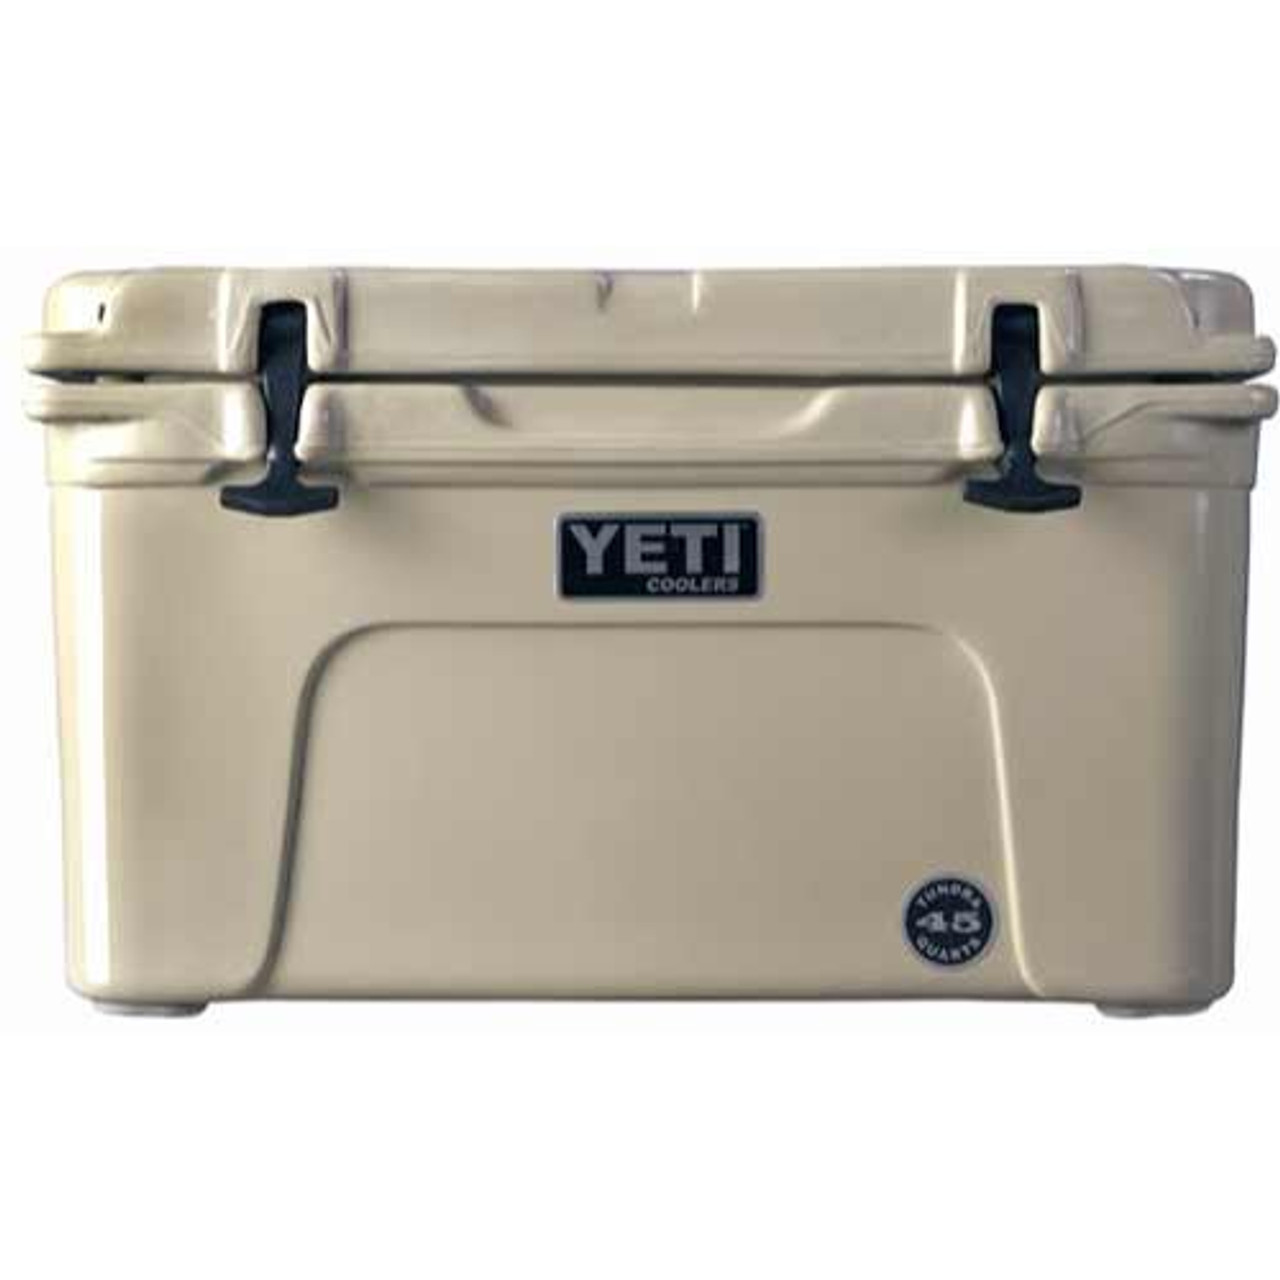 https://cdn11.bigcommerce.com/s-70mih4s/images/stencil/1280x1280/products/9153/18566/Yeti-YT45T-Tundra-45-Quart-Cooler-01439453046_image2__24399.1392823022.jpg?c=2